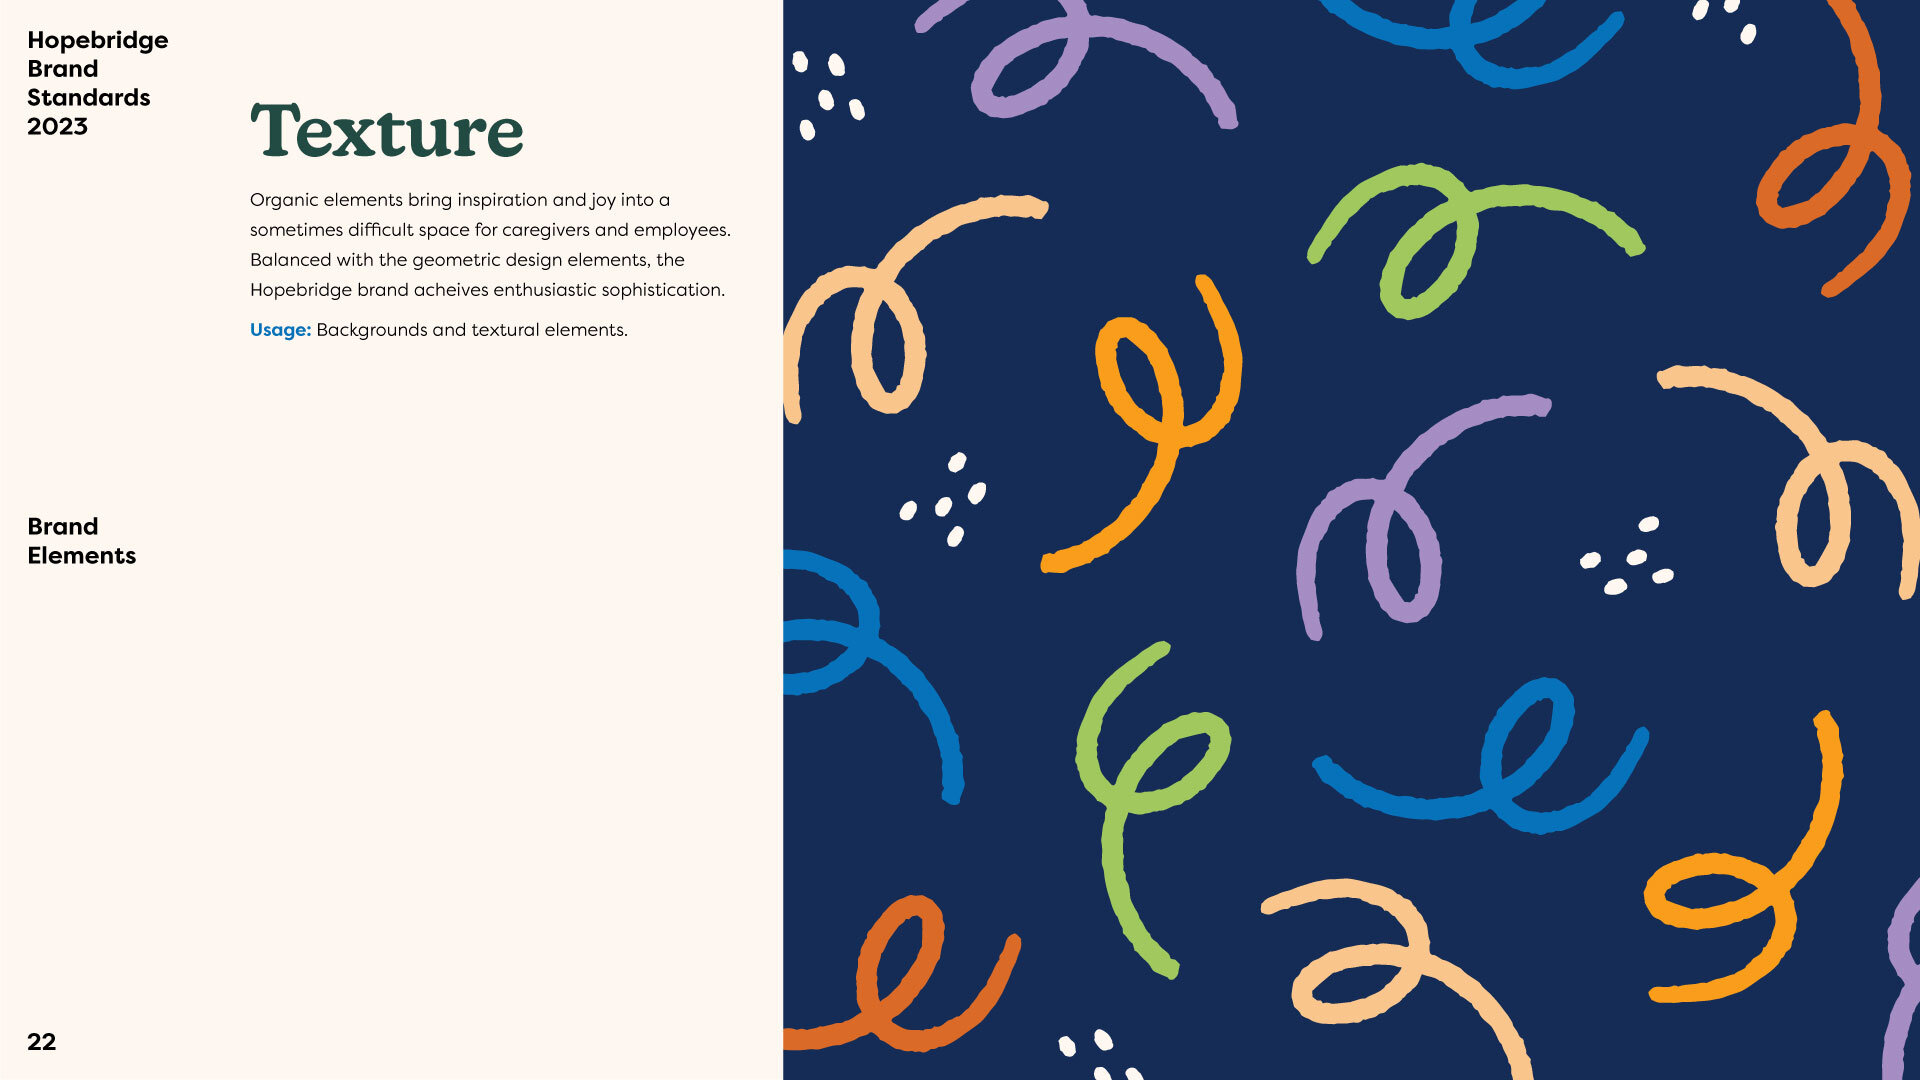 Hopebridge branding design element of dots and squiggles taken from the brand standards document